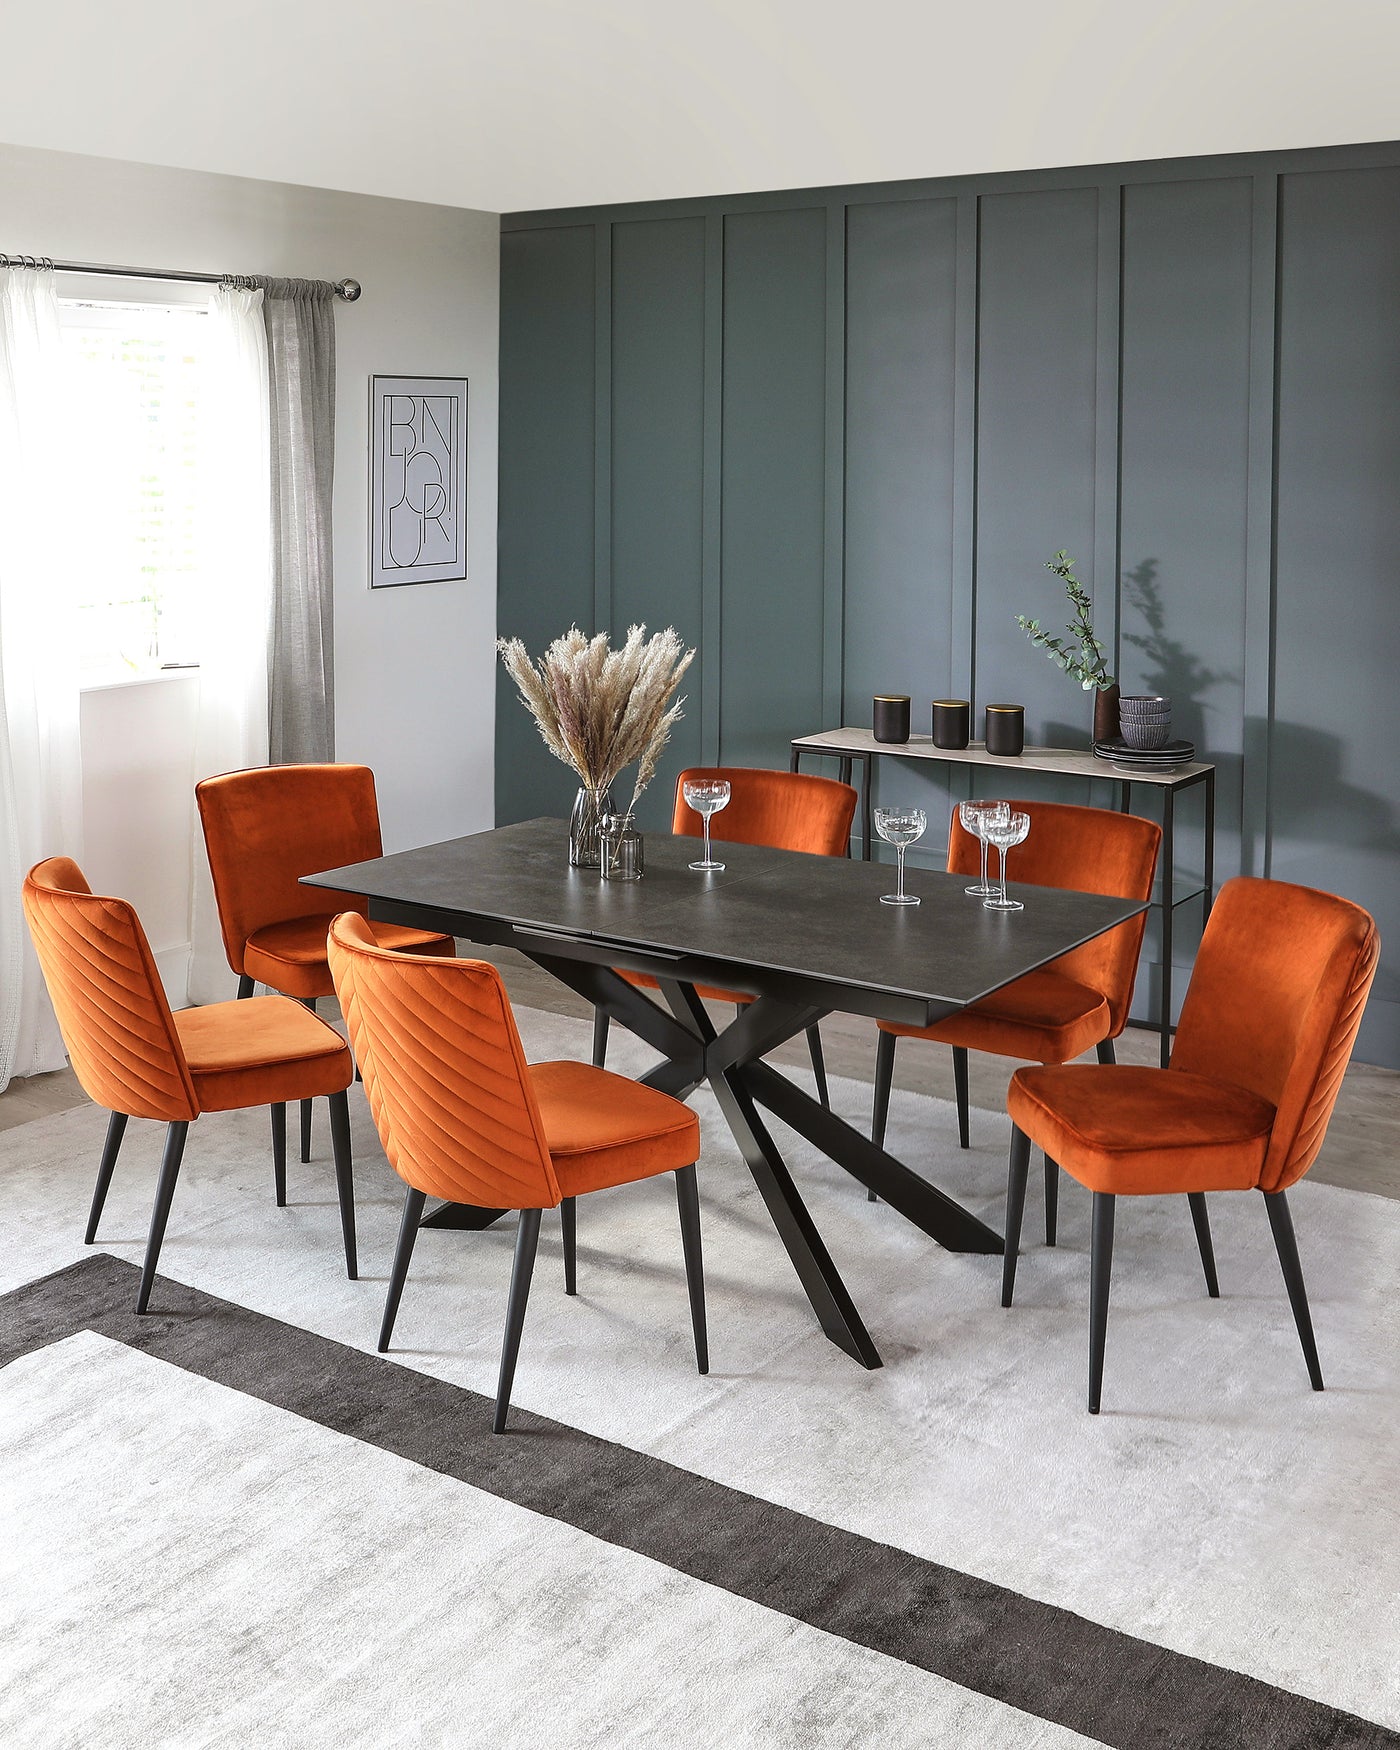 Modern dining room set featuring a black rectangular table with a unique angular leg design, accompanied by six burnt orange upholstered dining chairs with channel tufting and slim black metal legs, all placed on a grey and white striped area rug. A sideboard with decorative items is in the background.